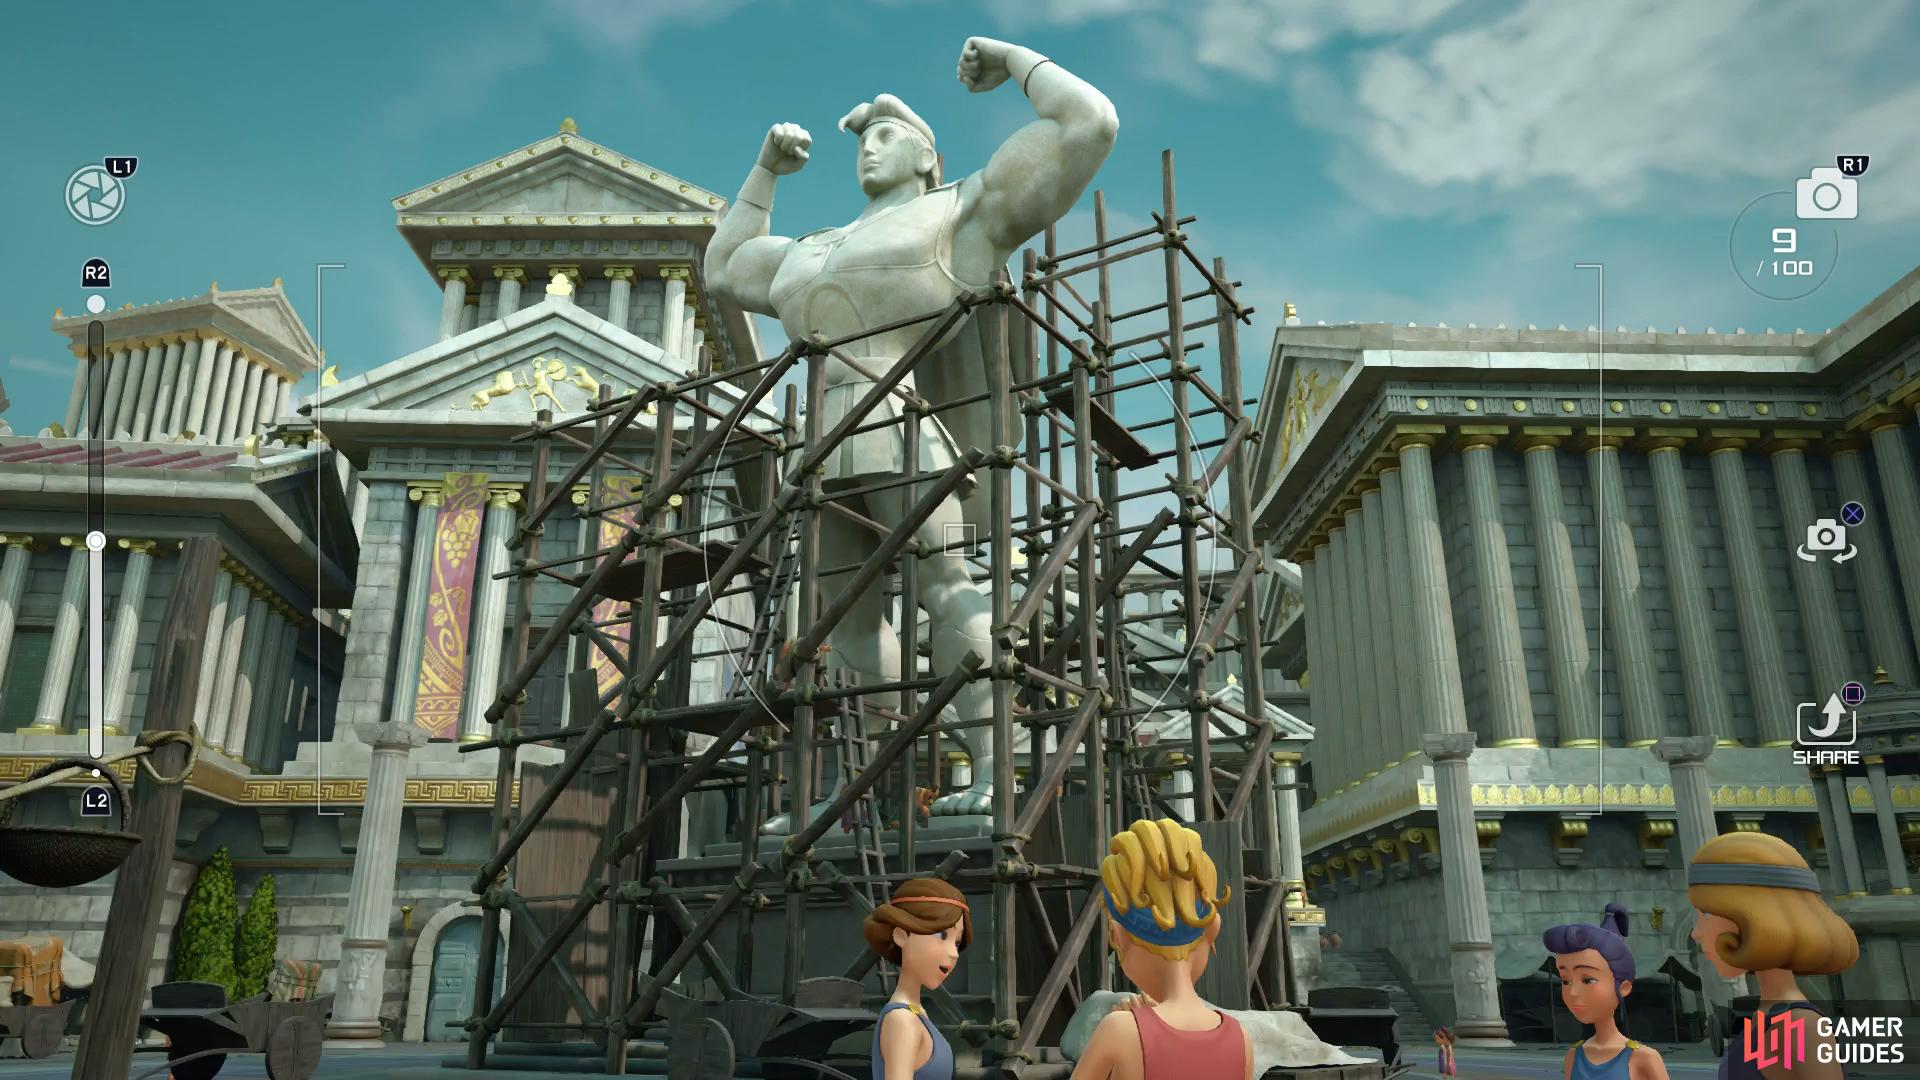 Snap a photo of the Hercules statue to complete a Photo Mission.